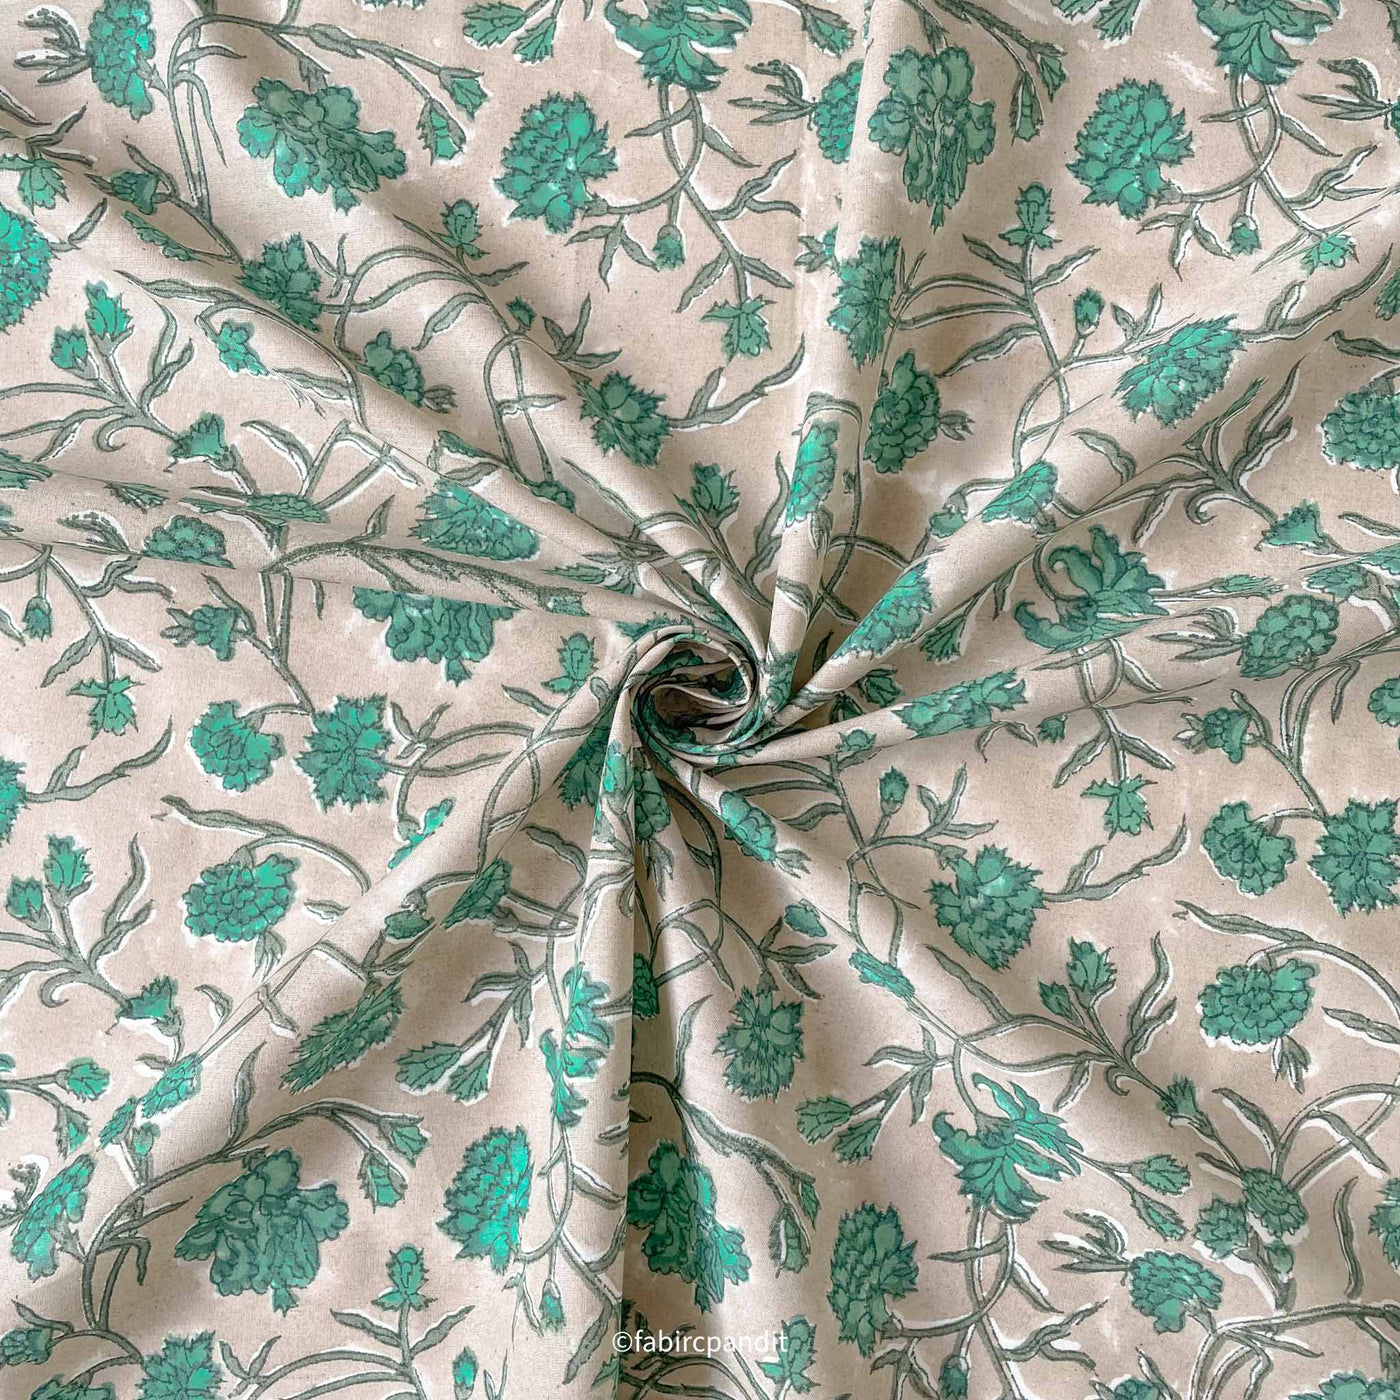 Fabric Pandit Fabric Grey and Turquoise Egyptian Floral Vines Hand Block Printed Pure Cotton Fabirc (Width 43 inches)